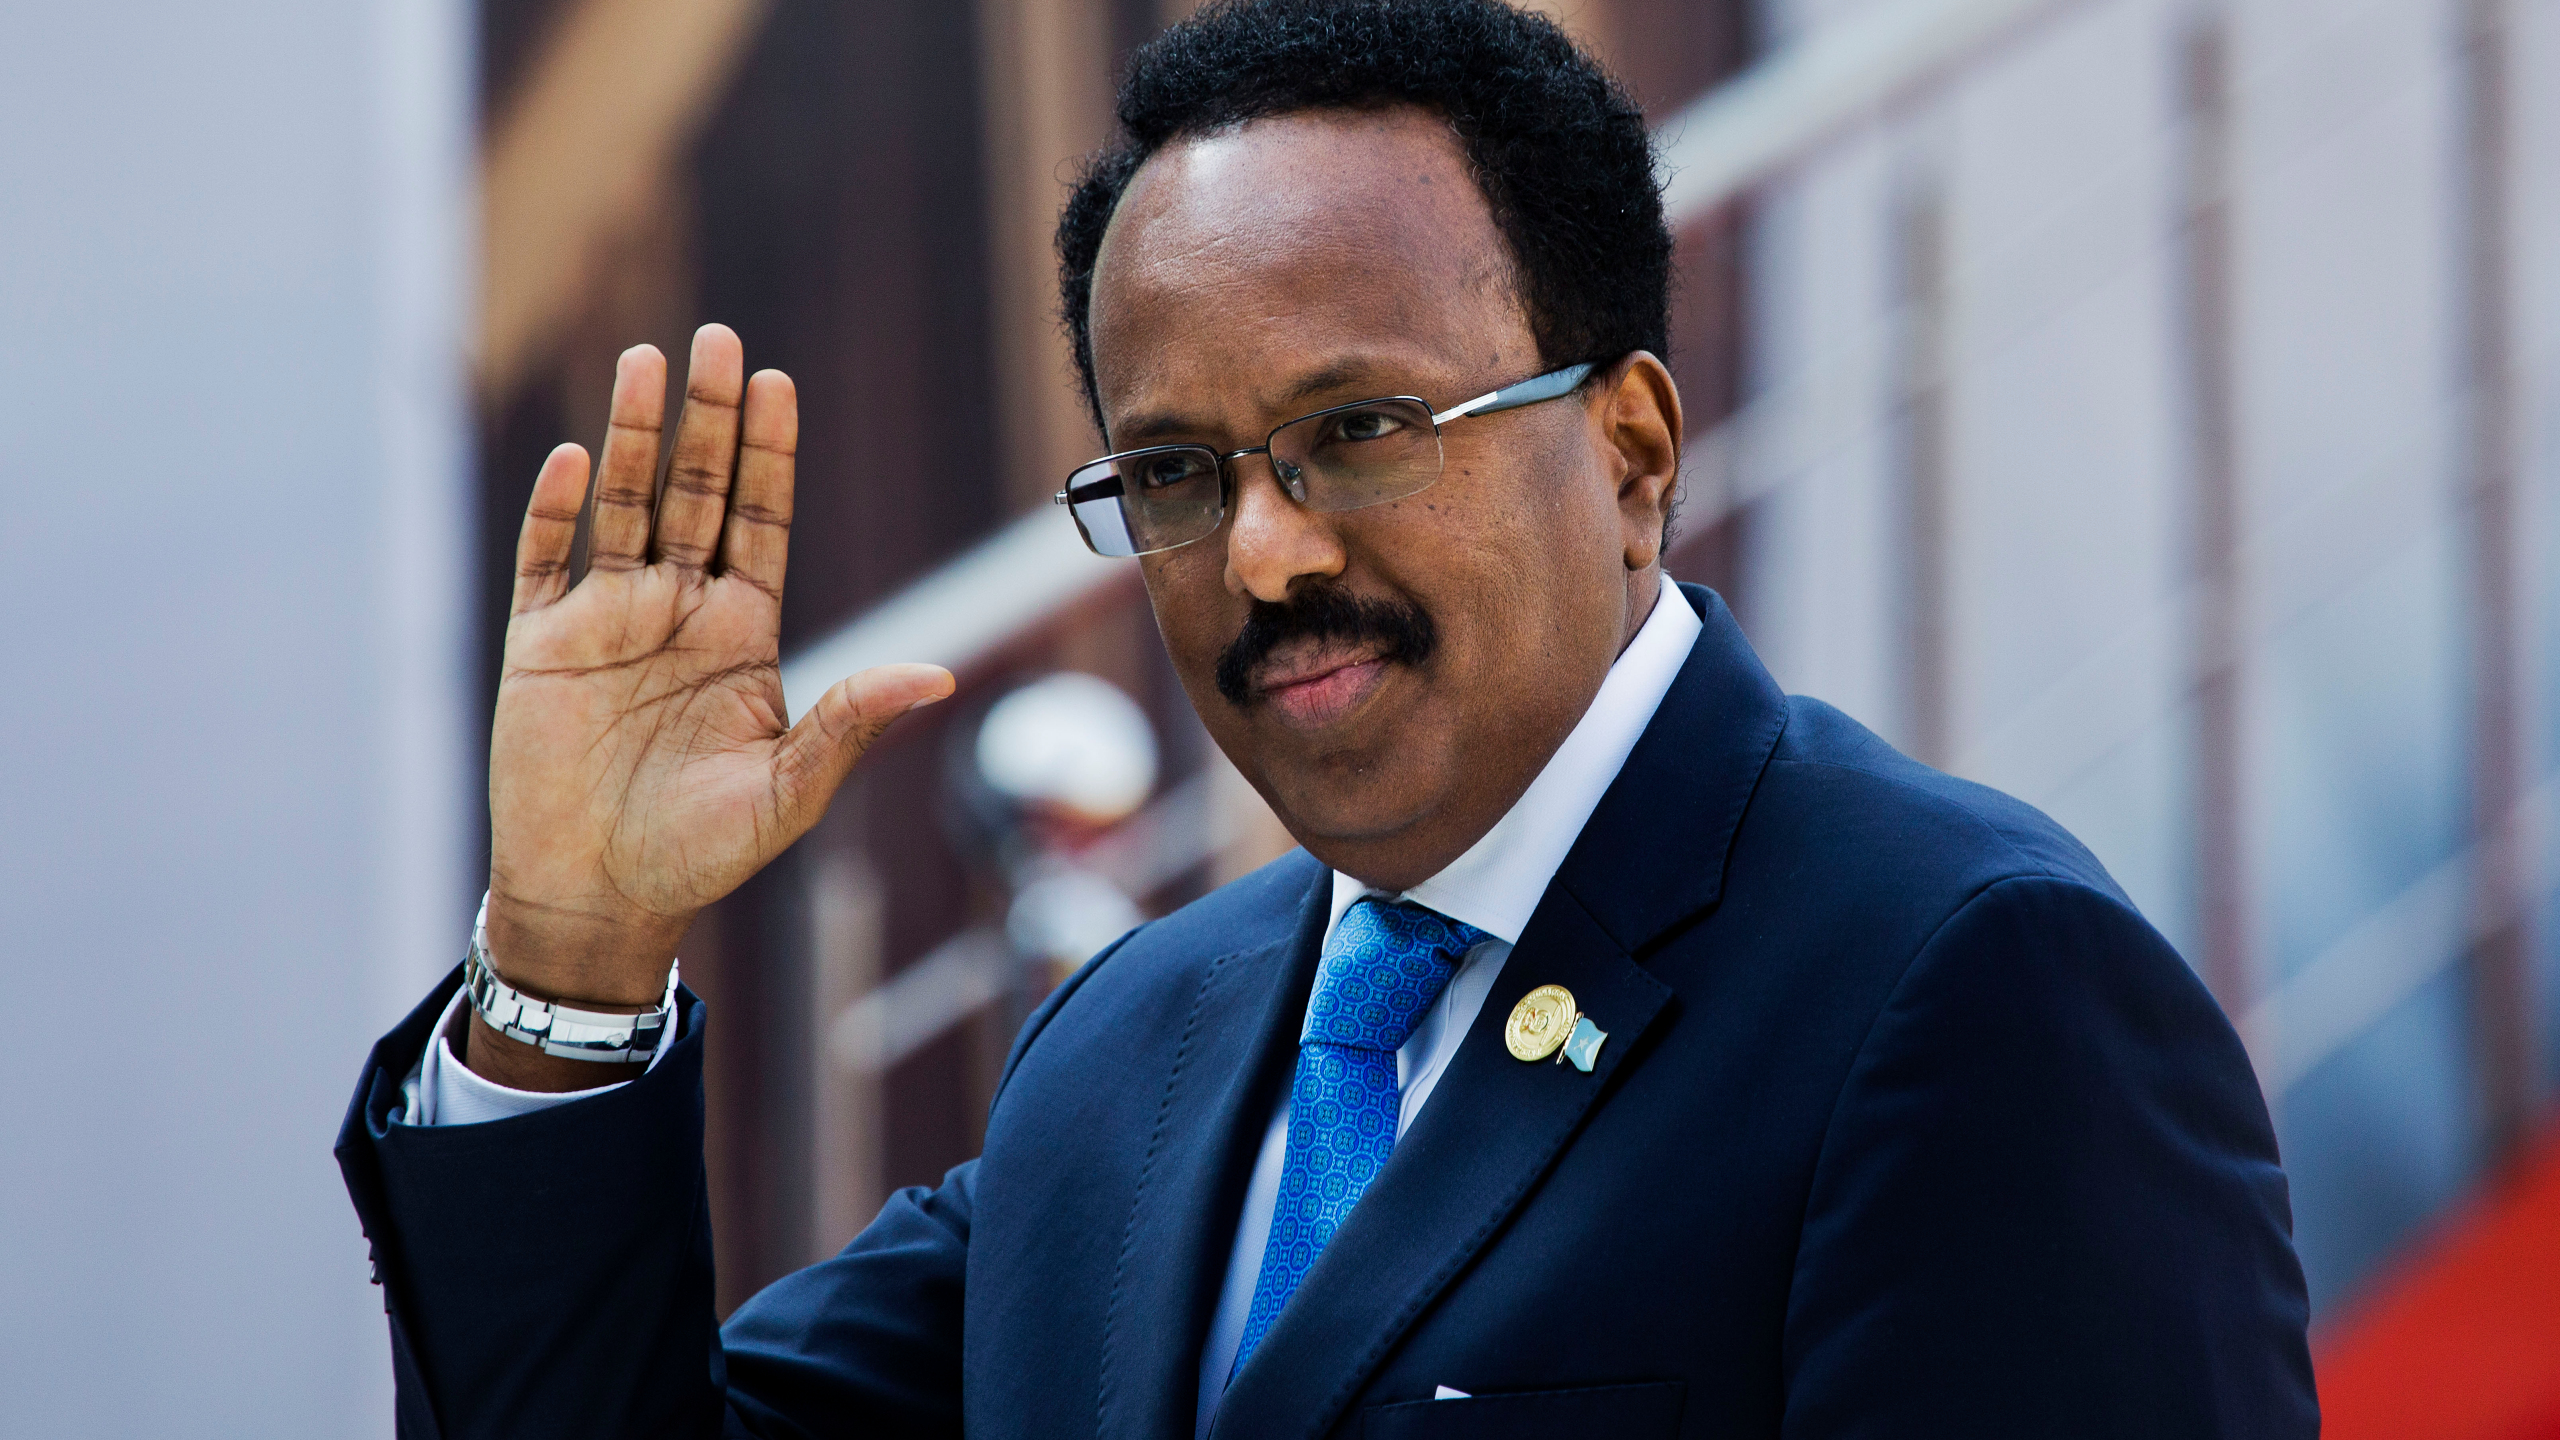 Bowing to pressure, Somalia’s president drops bid to extend term